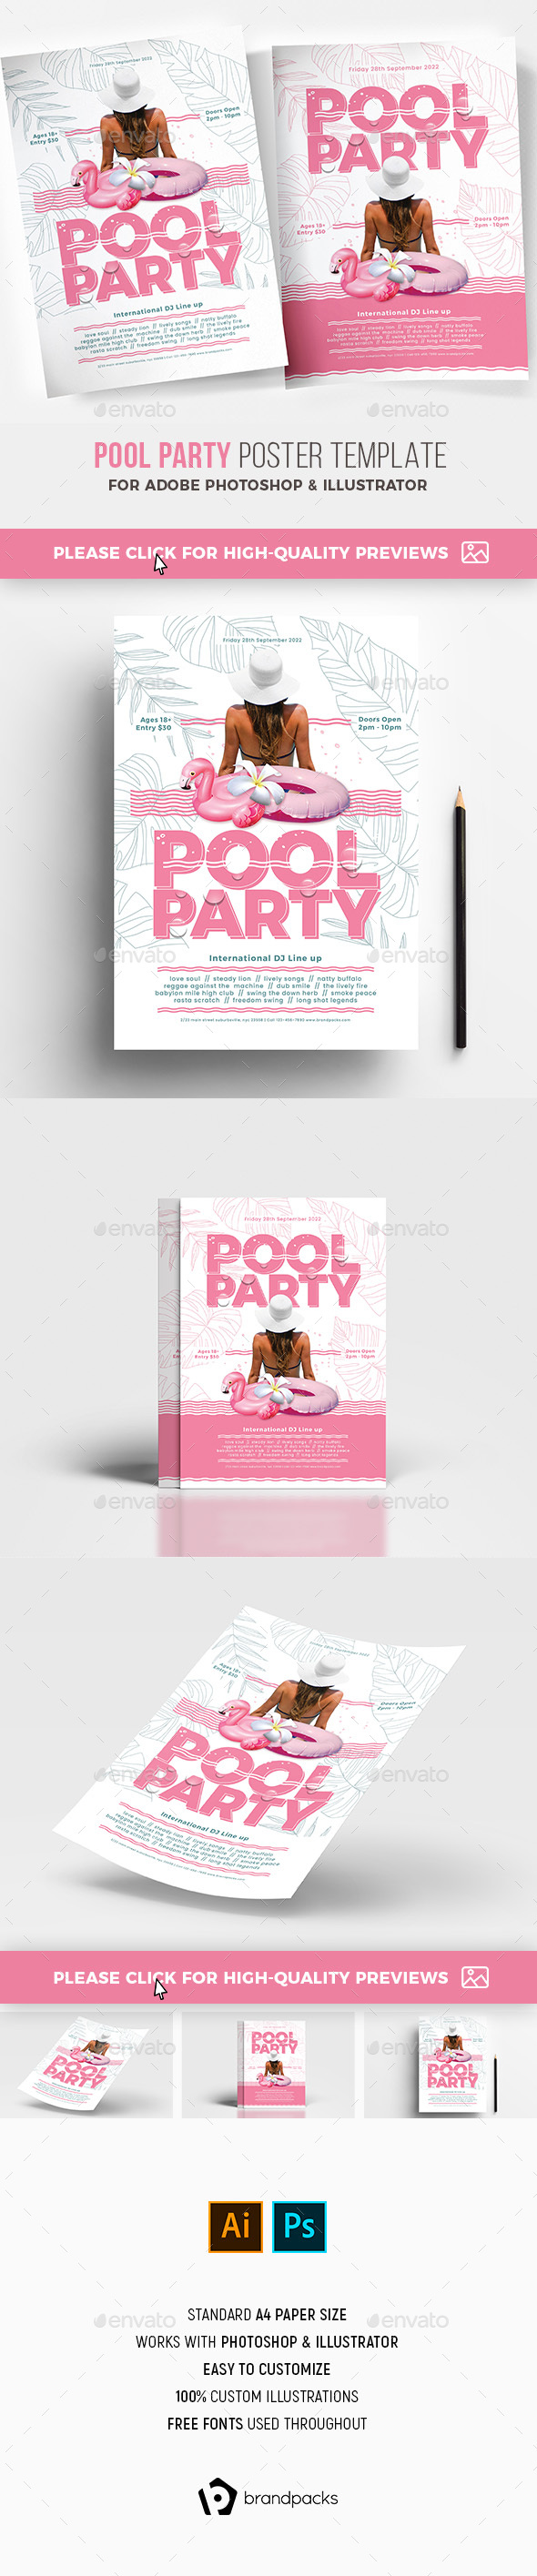 Pool Party Flyer / Poster